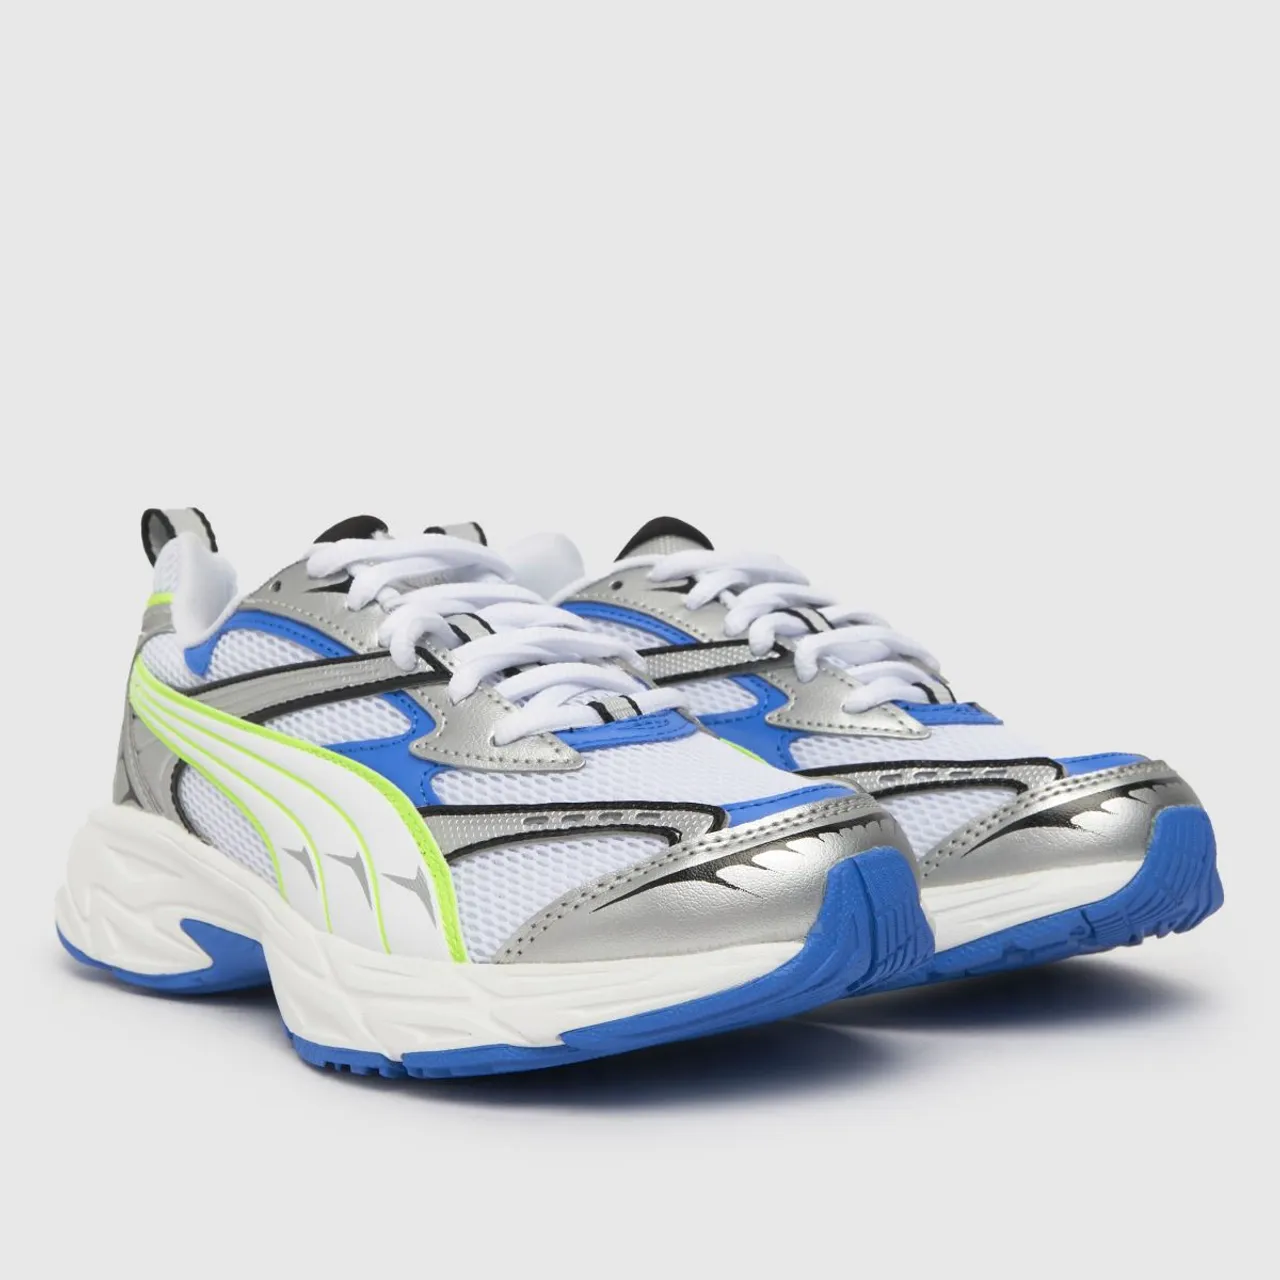 Puma White & Blue Morphic Boys Youth Trainers